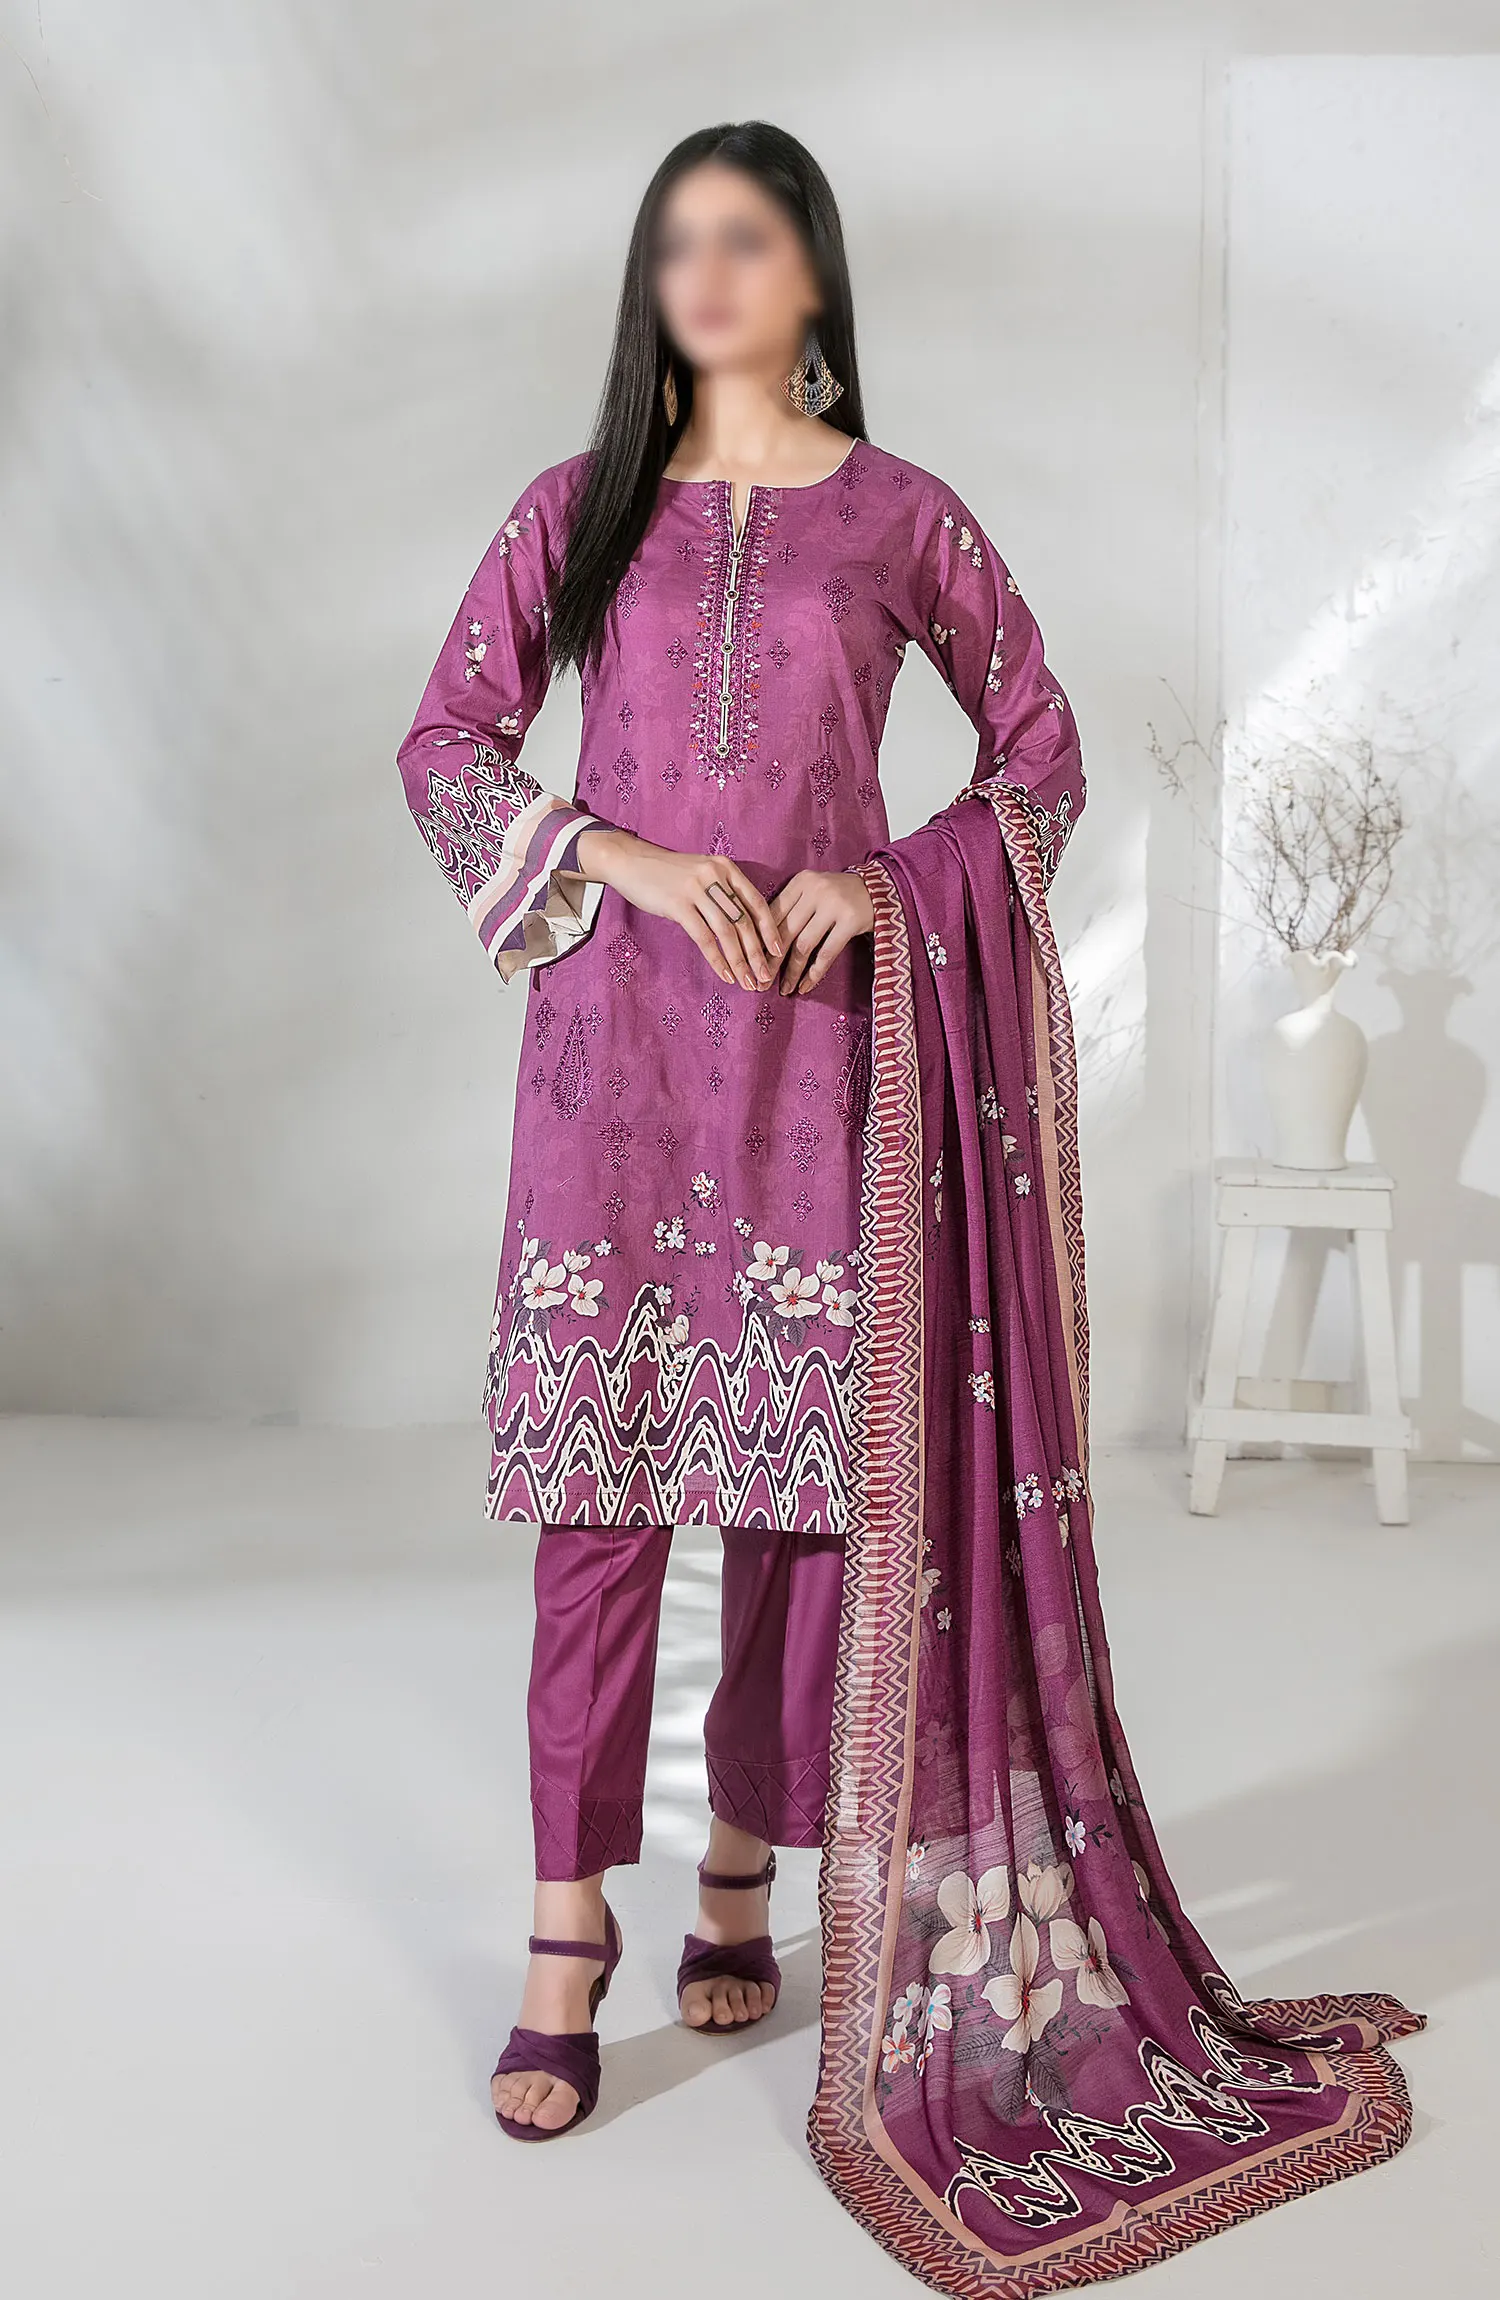 Pari Naaz - Embroidered Digital Printed Lawn Collection - D-2051